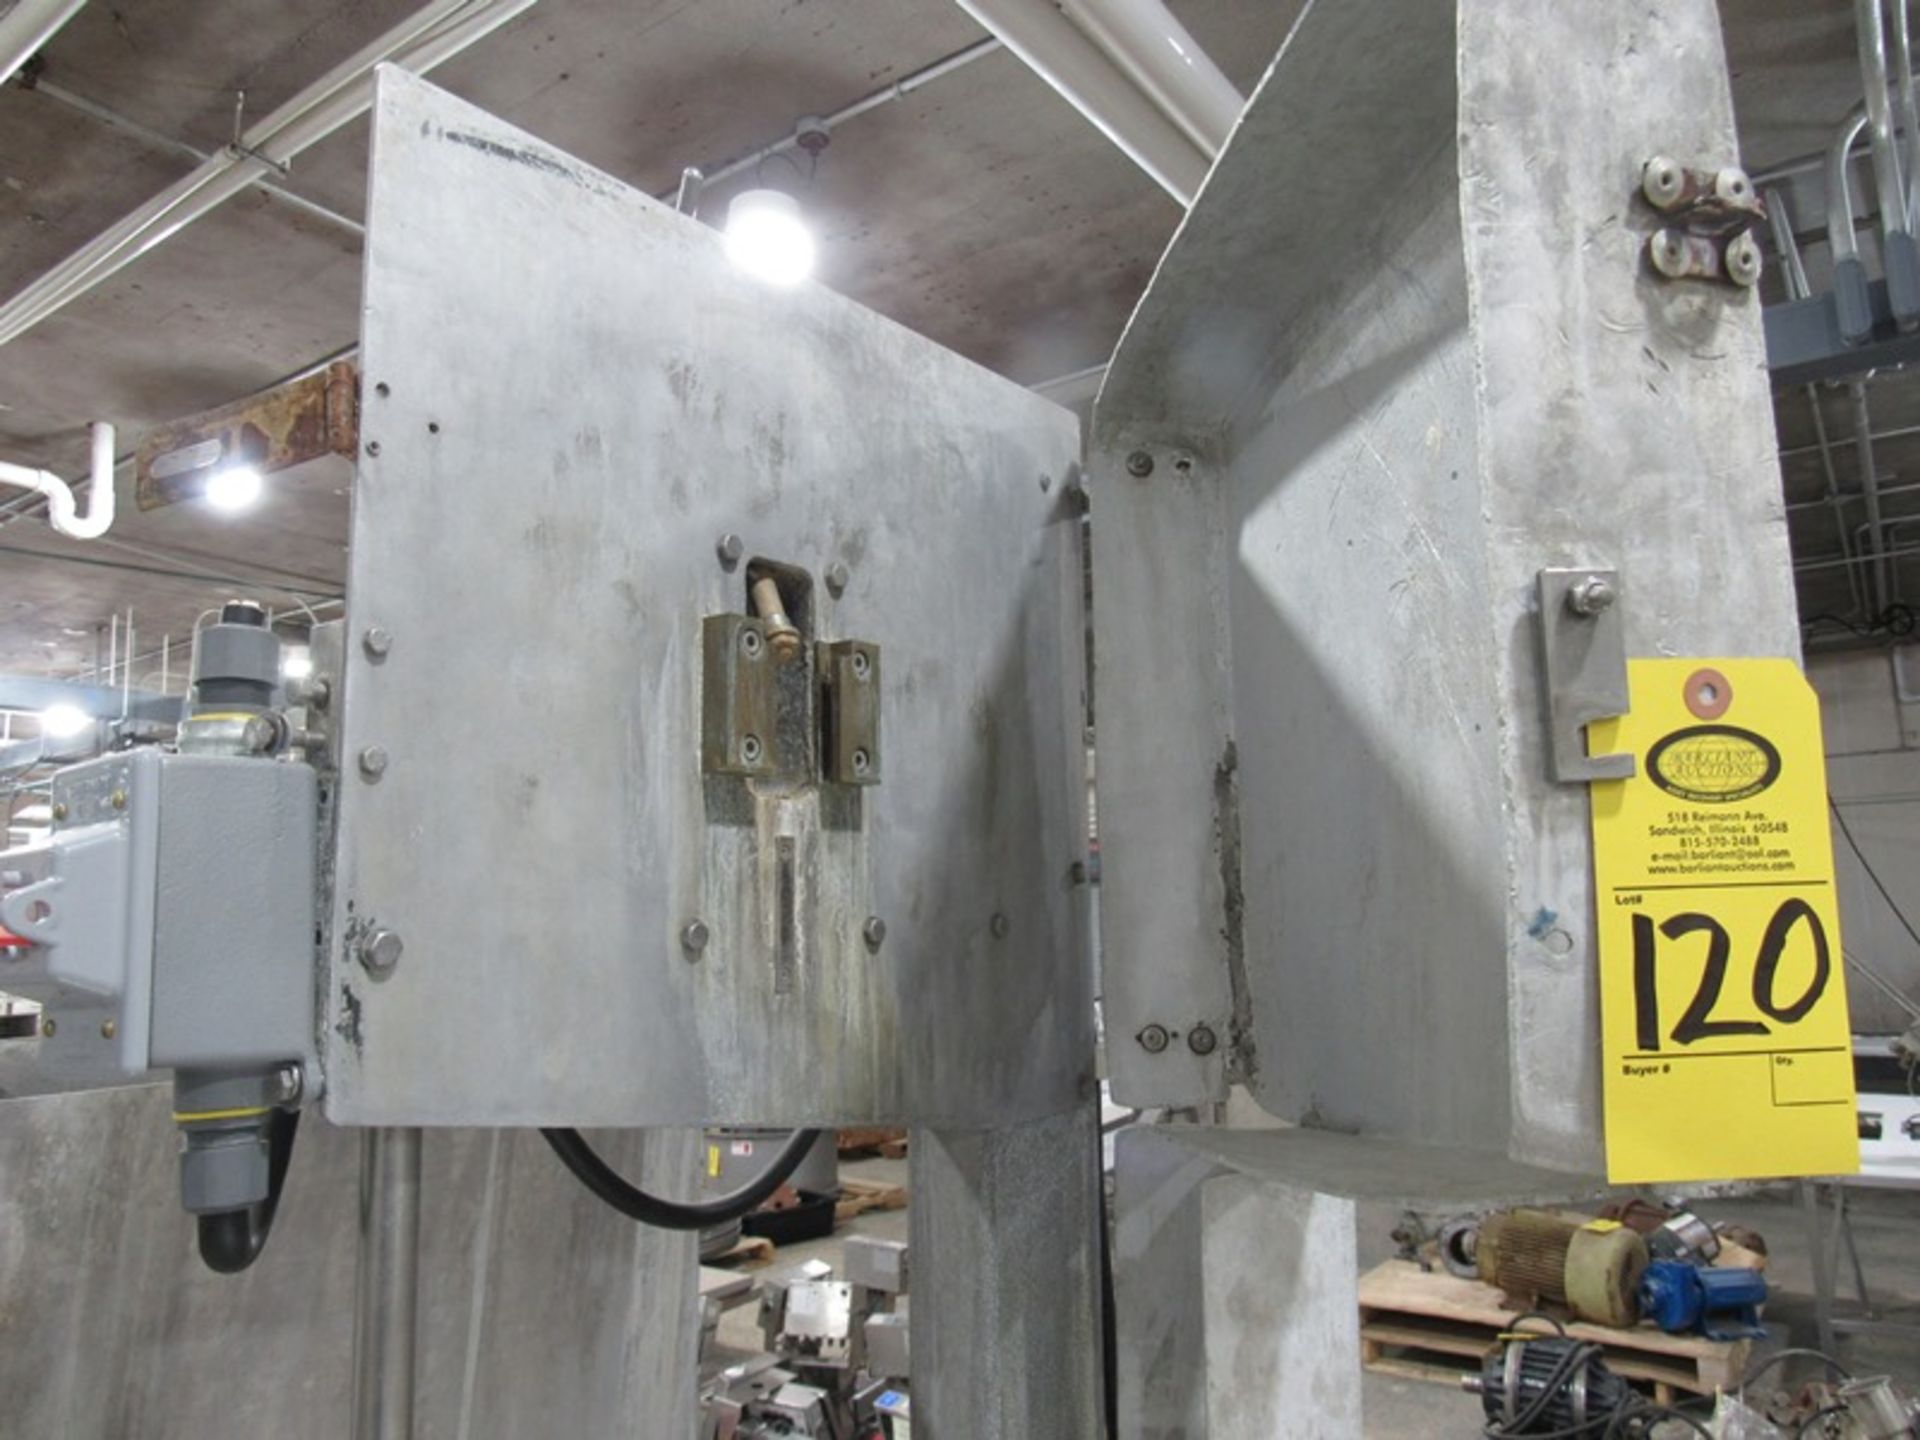 AEW Mdl. 400M Band Saw, Ser. #LHS120585 Removal: By Appointment Only. Required Rigging Fee $50.00. - Image 4 of 4